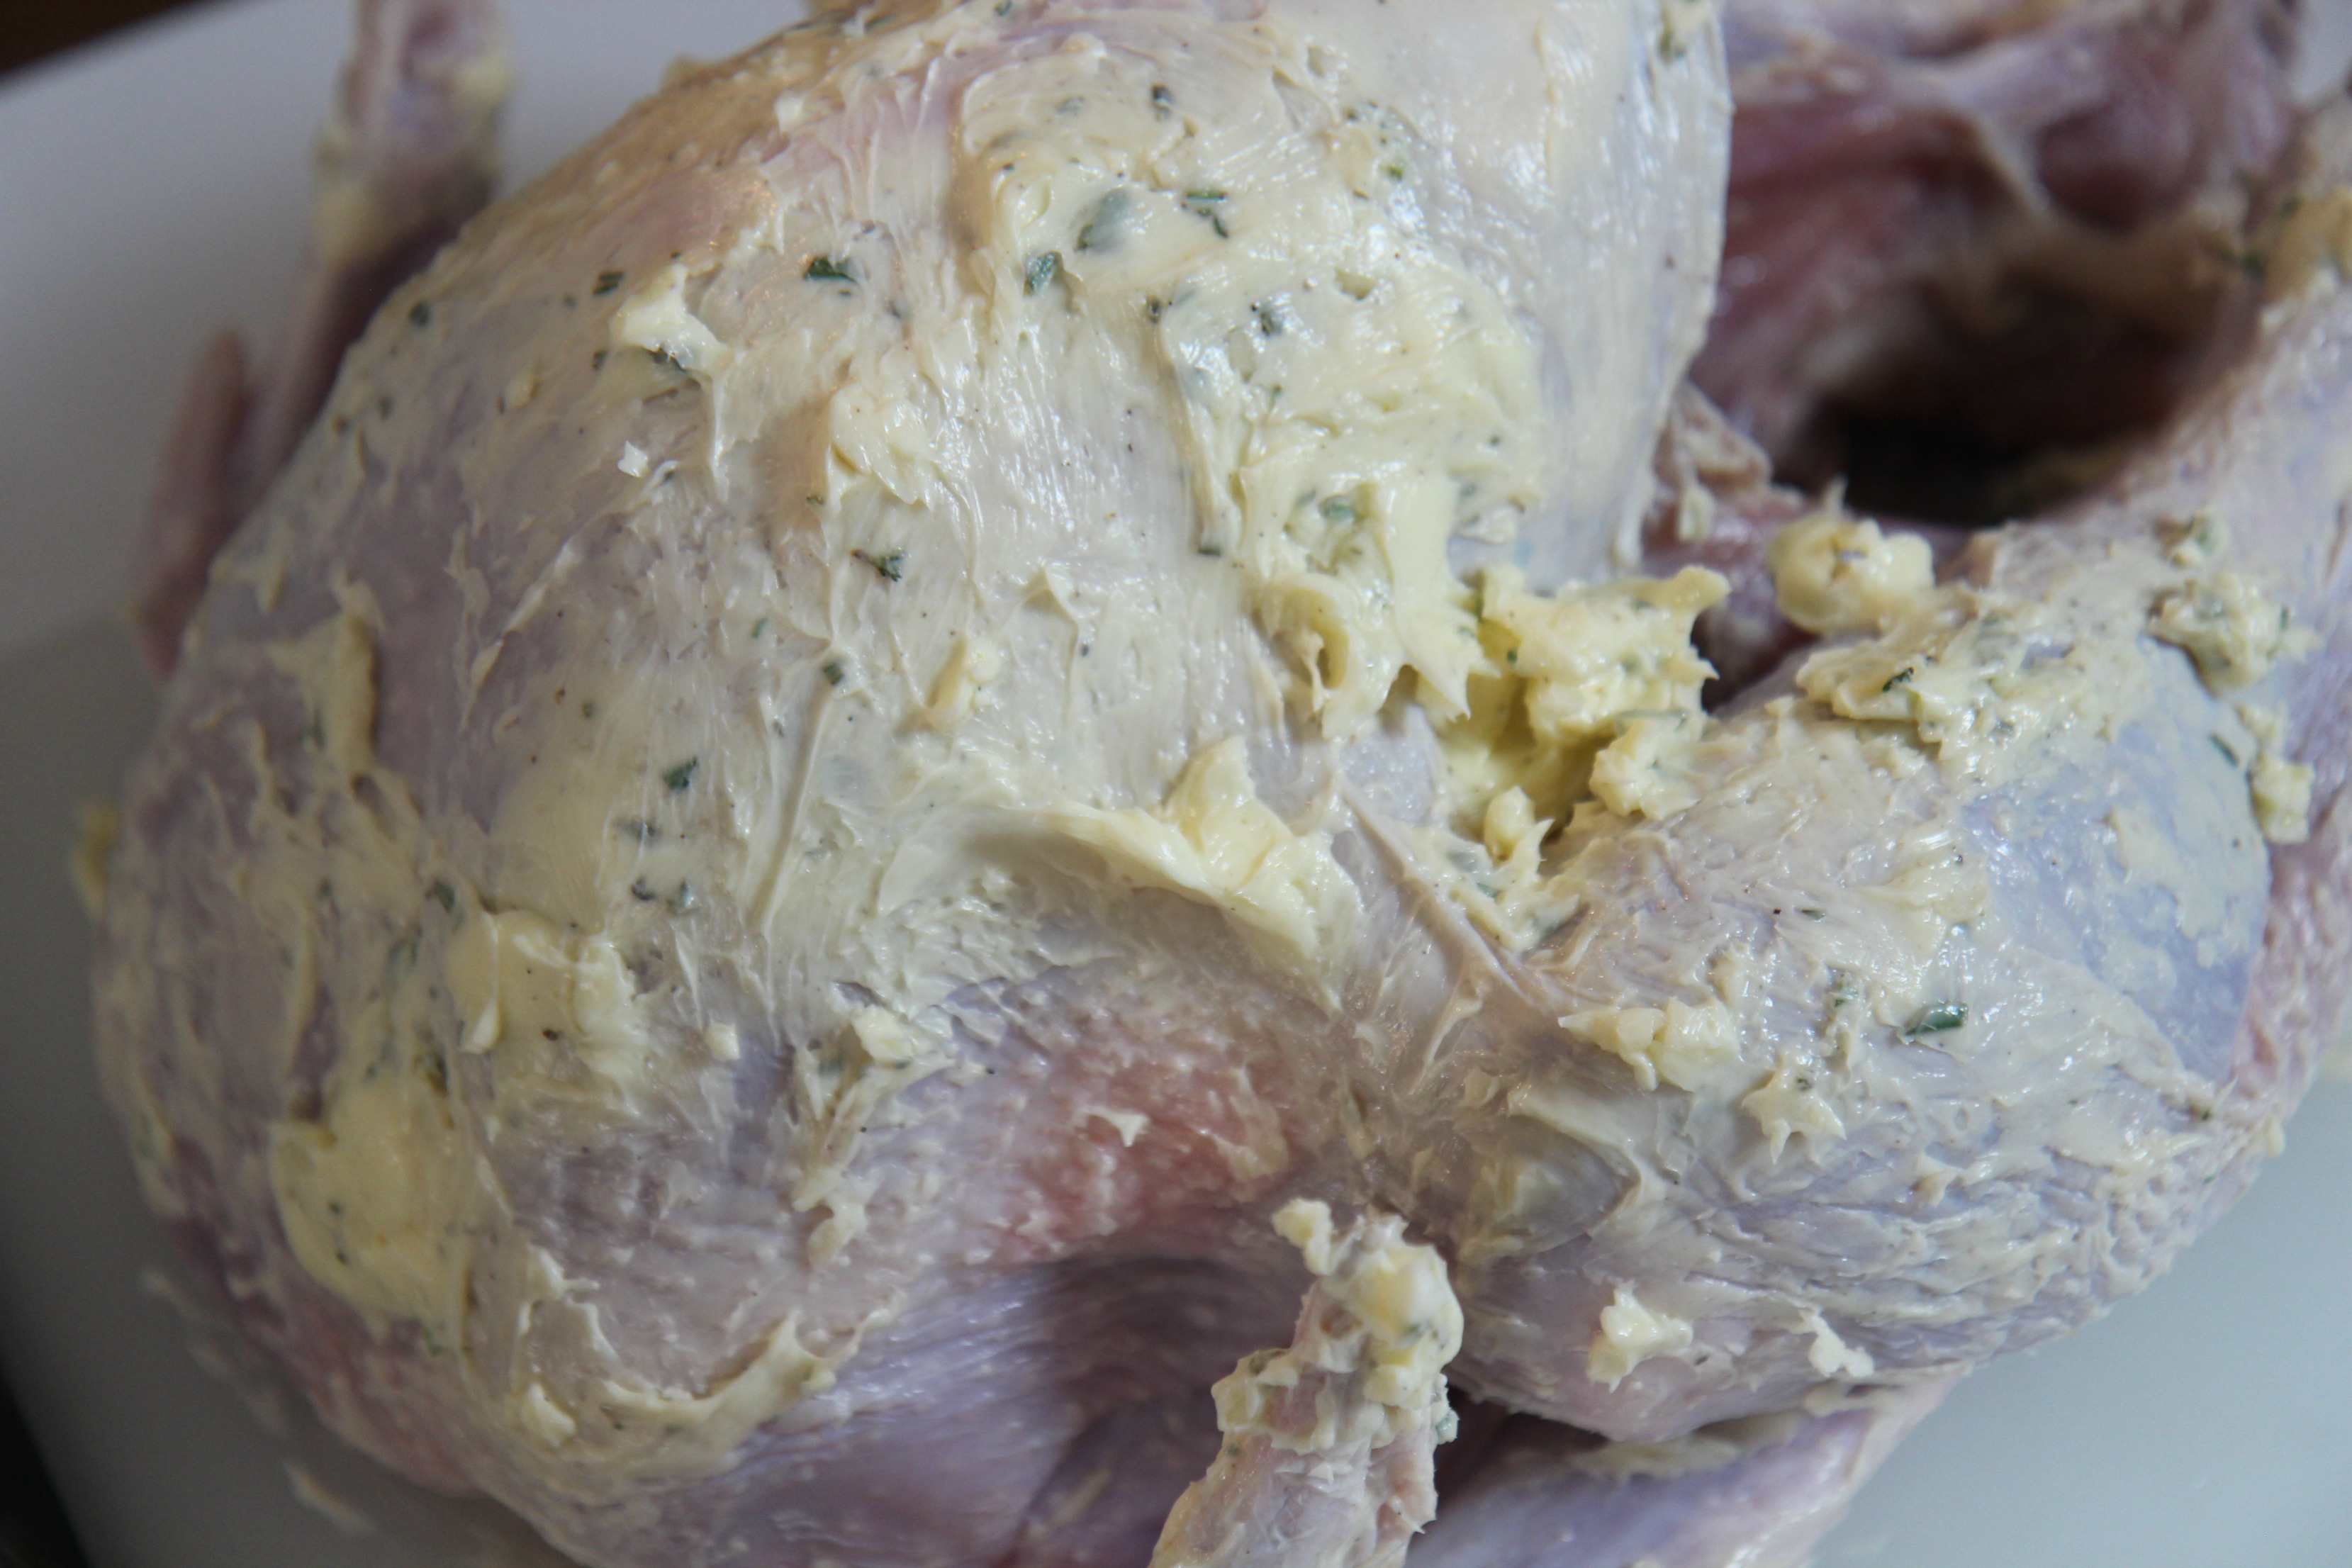 Rub the garlic and herb butter mixture over the raw turkey for a moist and flavorful roasted turkey.